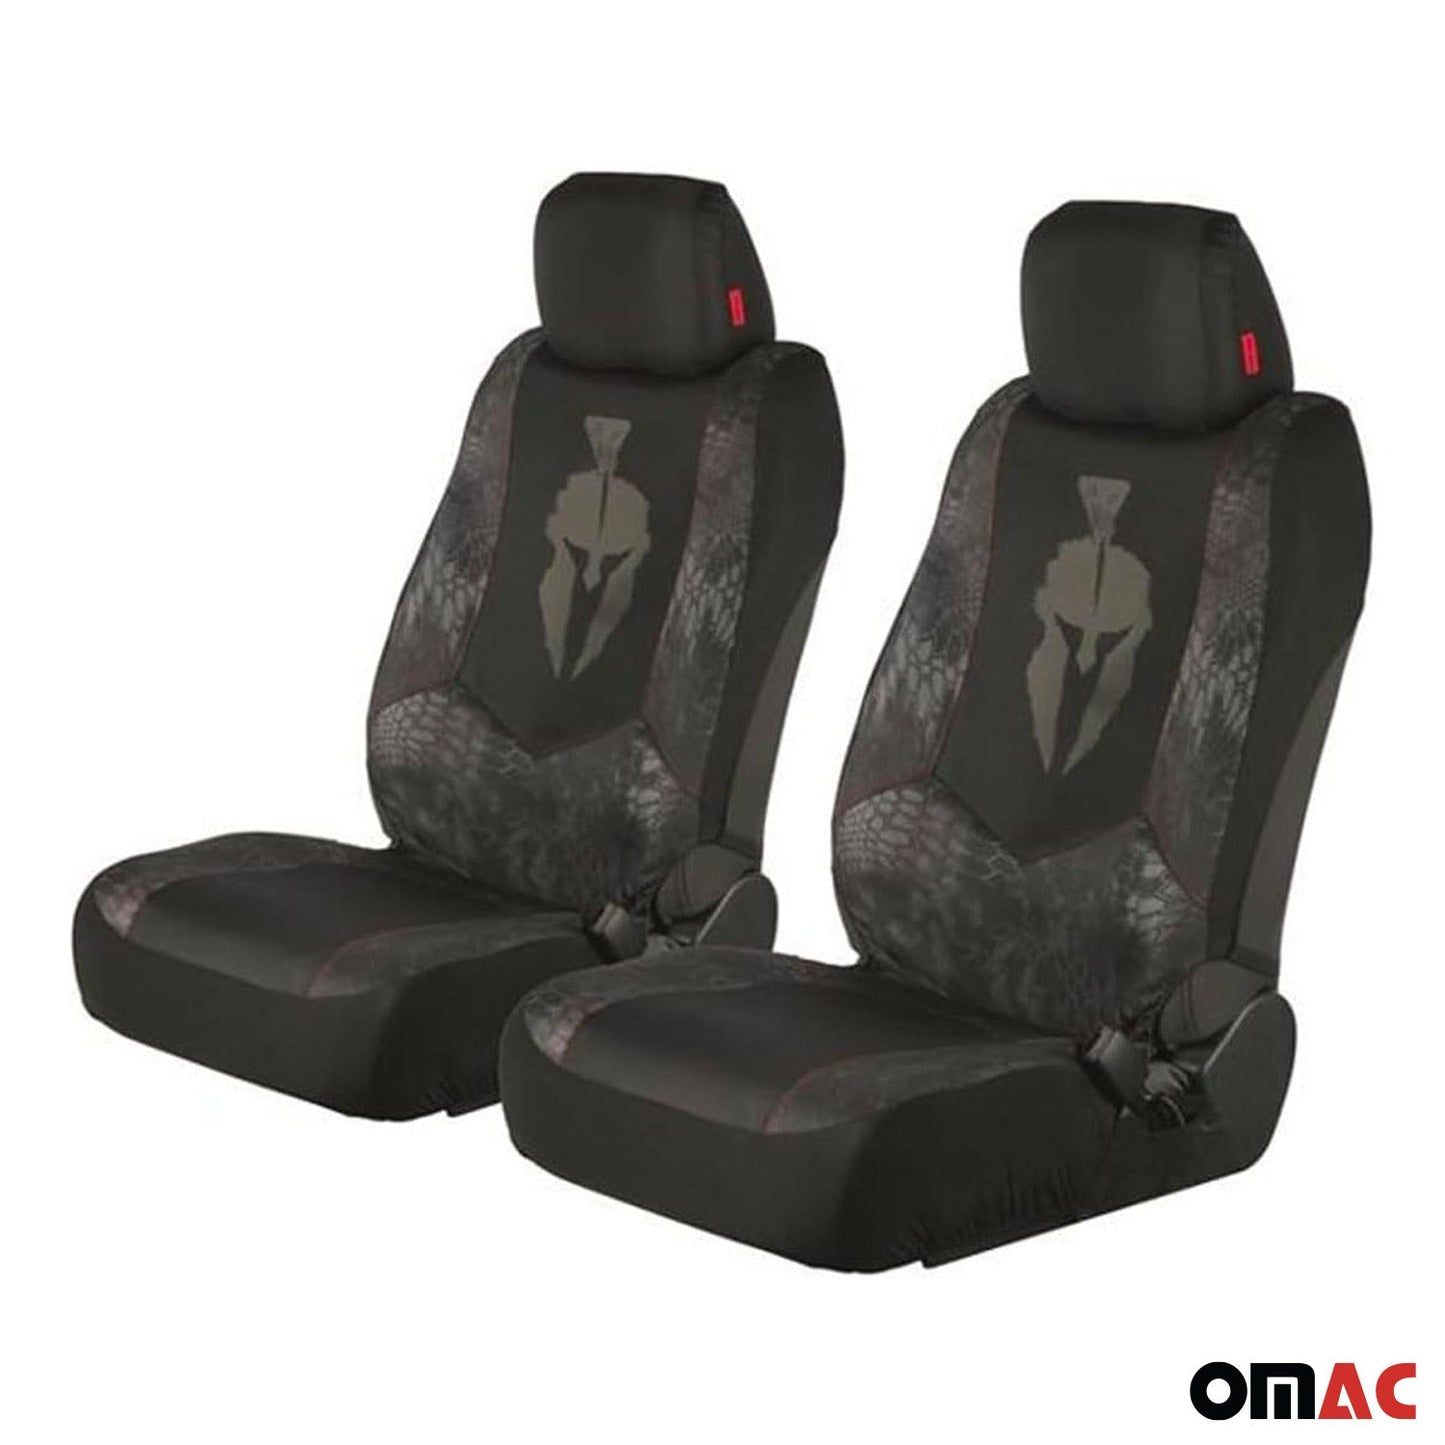 OMAC Typhon Camo Pack of 2 Front Lowback Seat Covers Truck Car SUV One Size 96SEATCOVER1